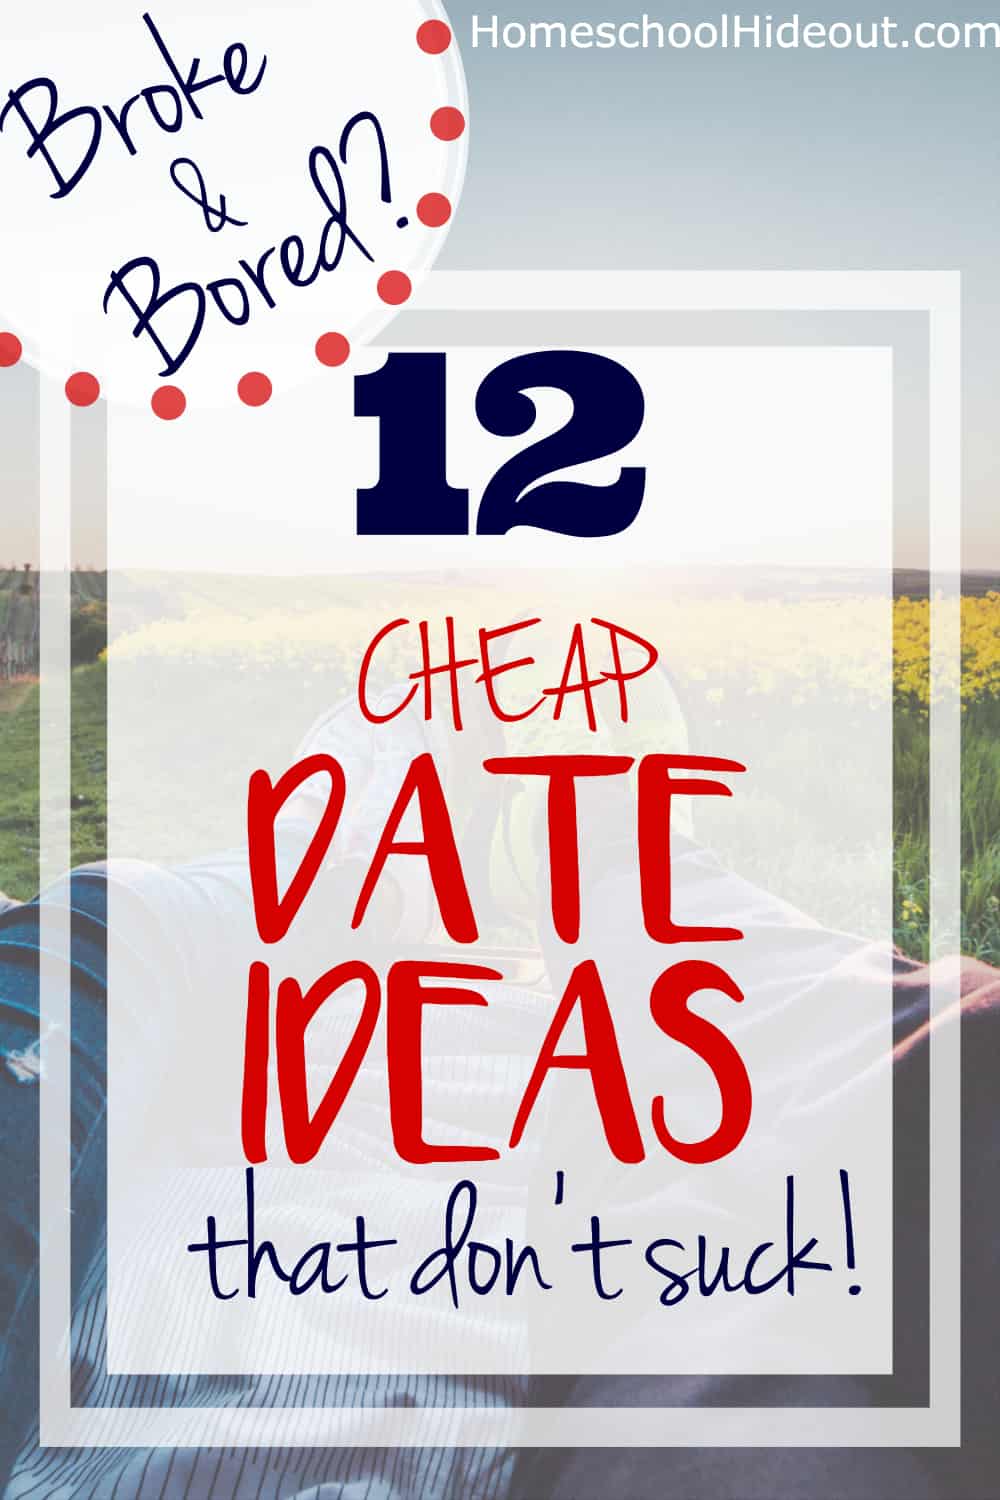 This list of cheap date ideas has me excited about our next date night! Gotta make it happen SOON!